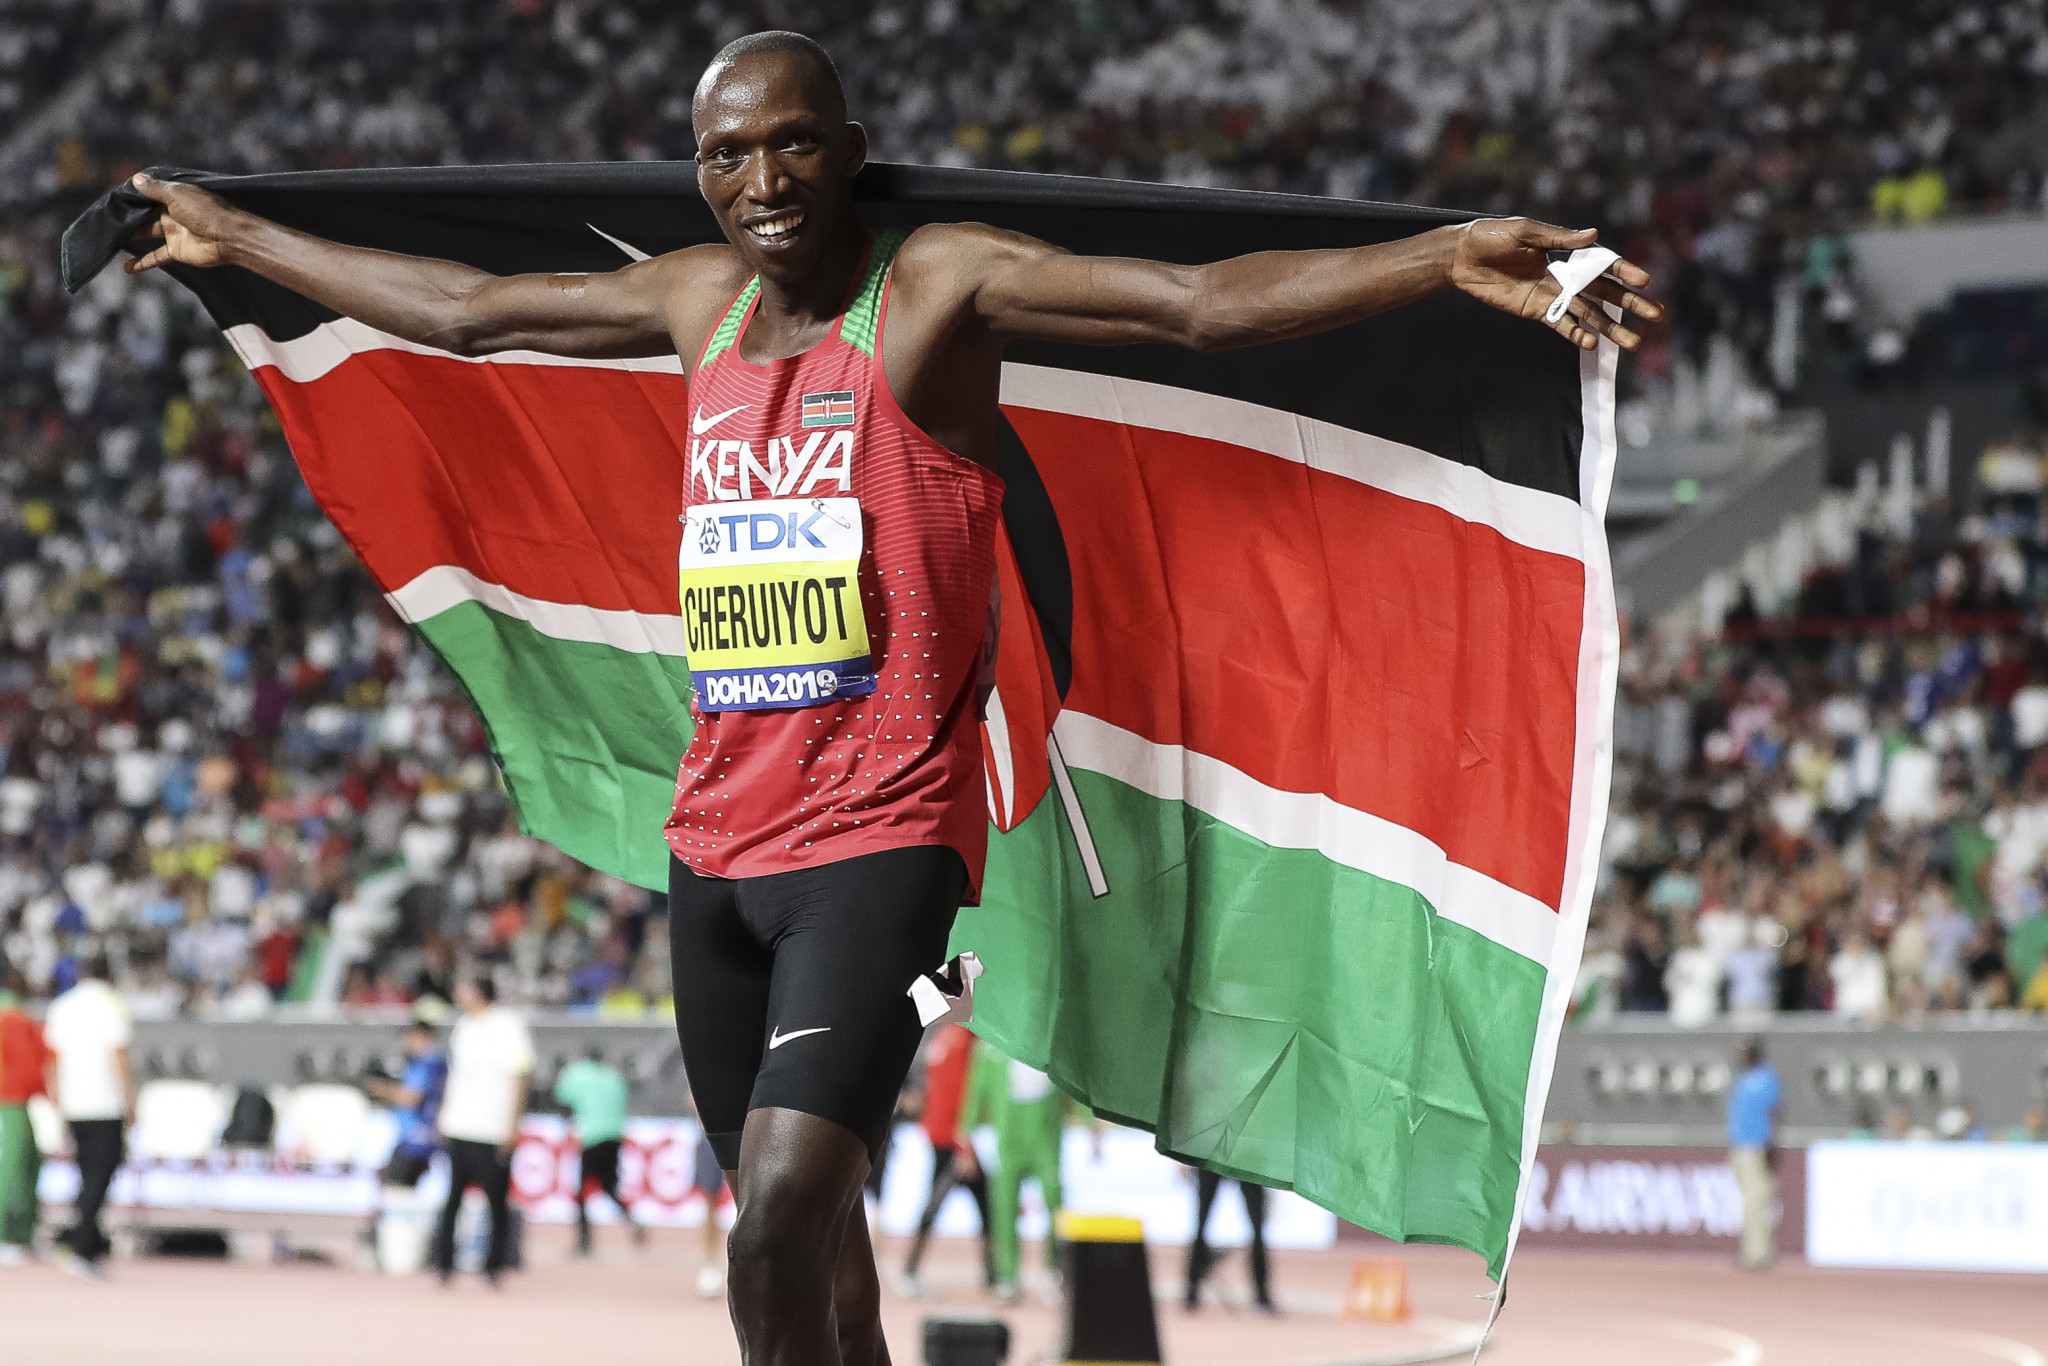 Cheruiyot to compete in virtual 2000m race at Impossible Games